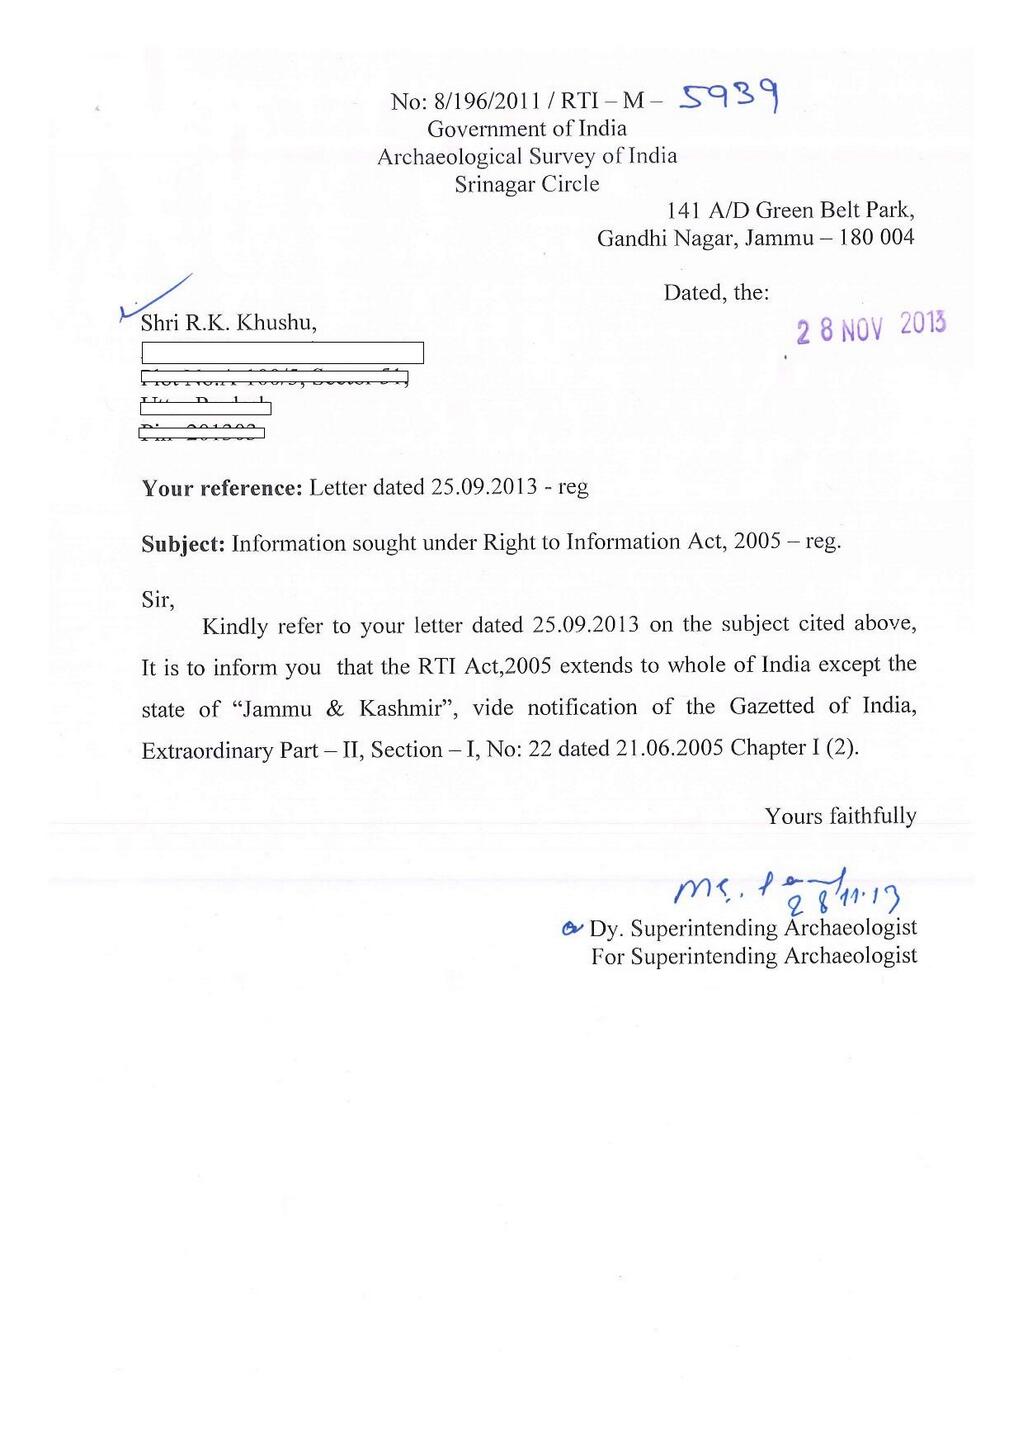 Govt reply to RTI application about Shankaracharya Hill